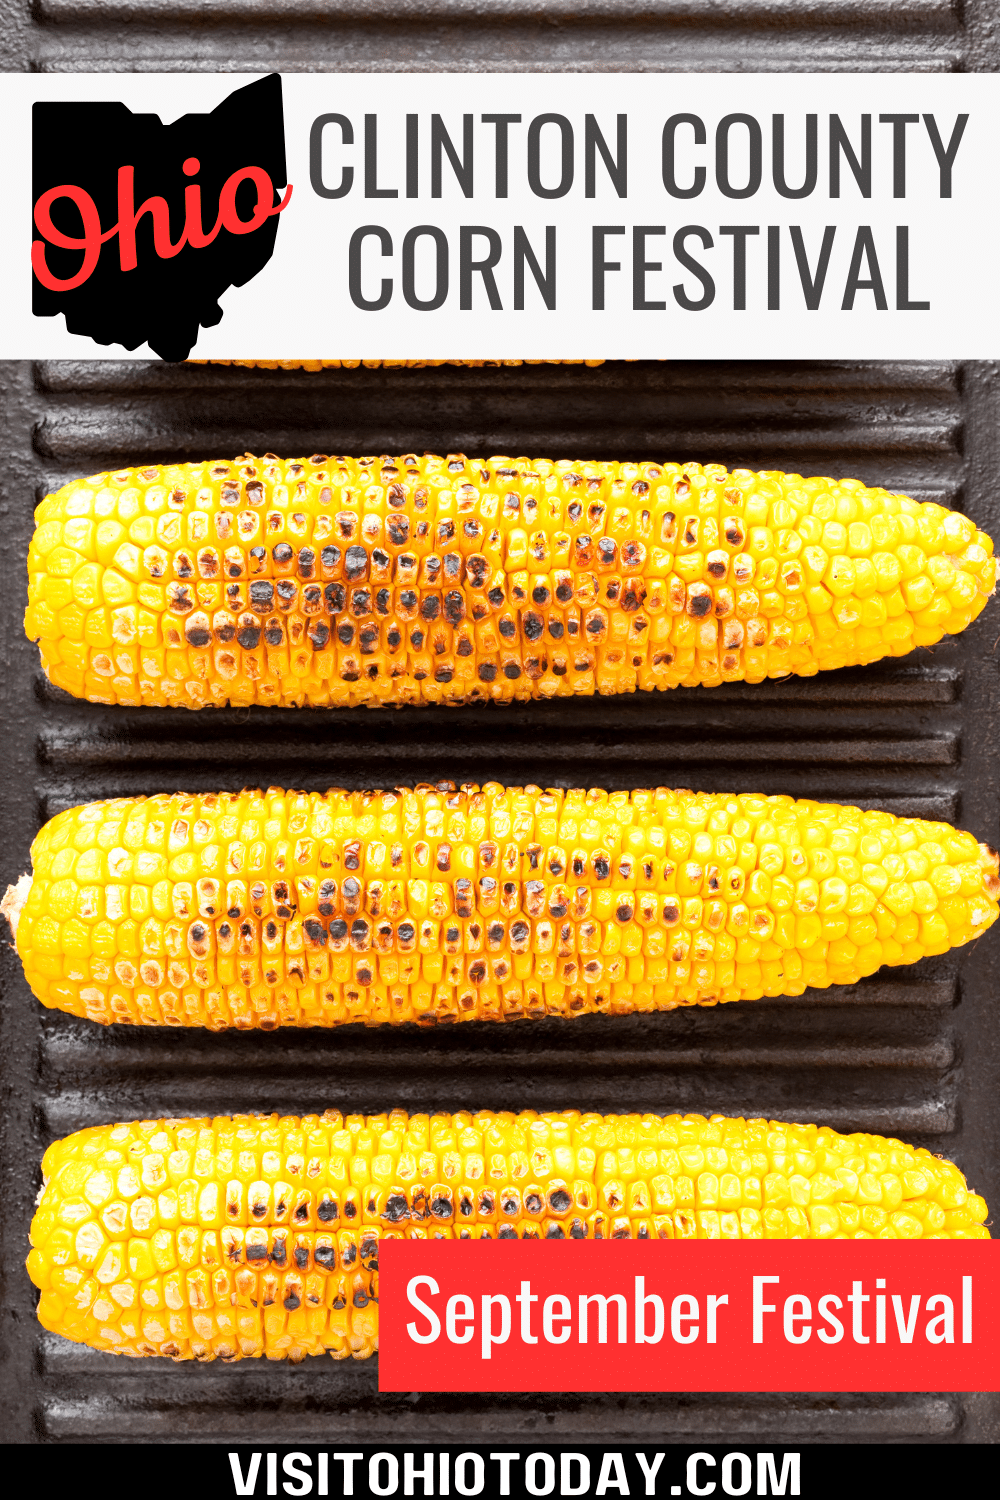 Clinton County Corn Festival celebrates the area’s agricultural heritage with this three-day extravaganza. The festival is held the first weekend after Labor Day at the Clinton County Fairgrounds and is organized by The Antique Power Club of Clinton County.